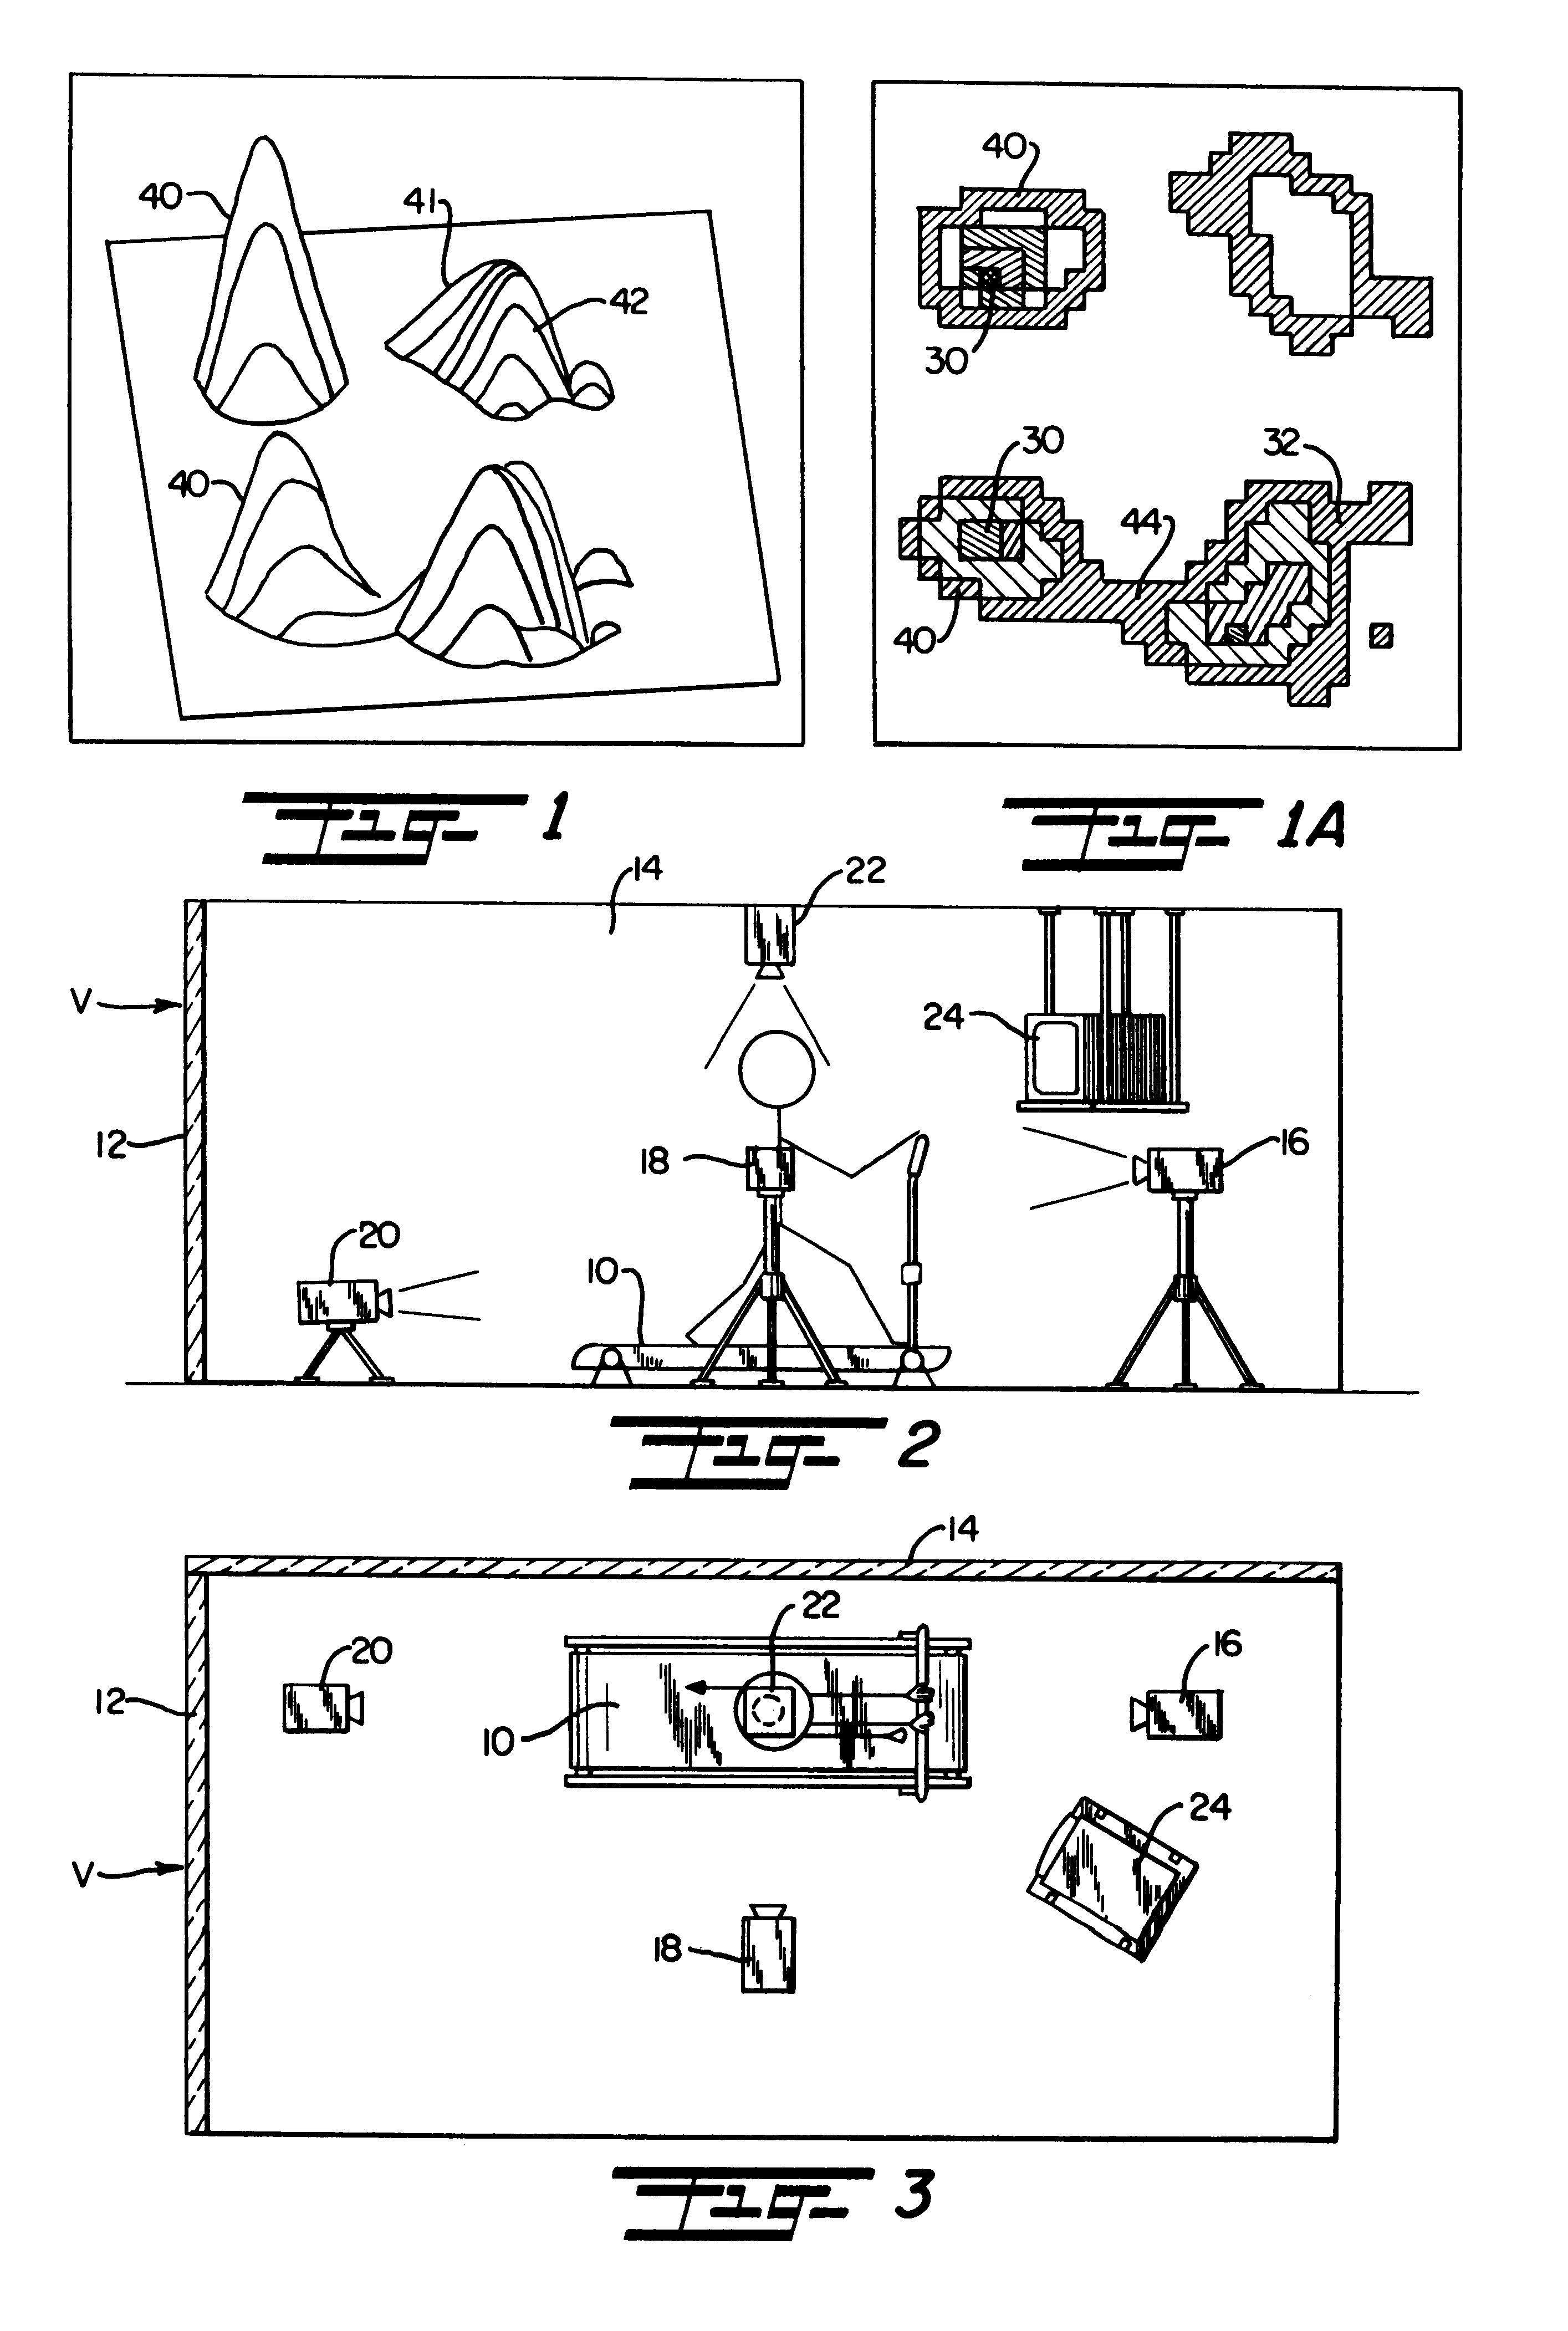 Method and apparatus for biomechanical correction of gait and posture